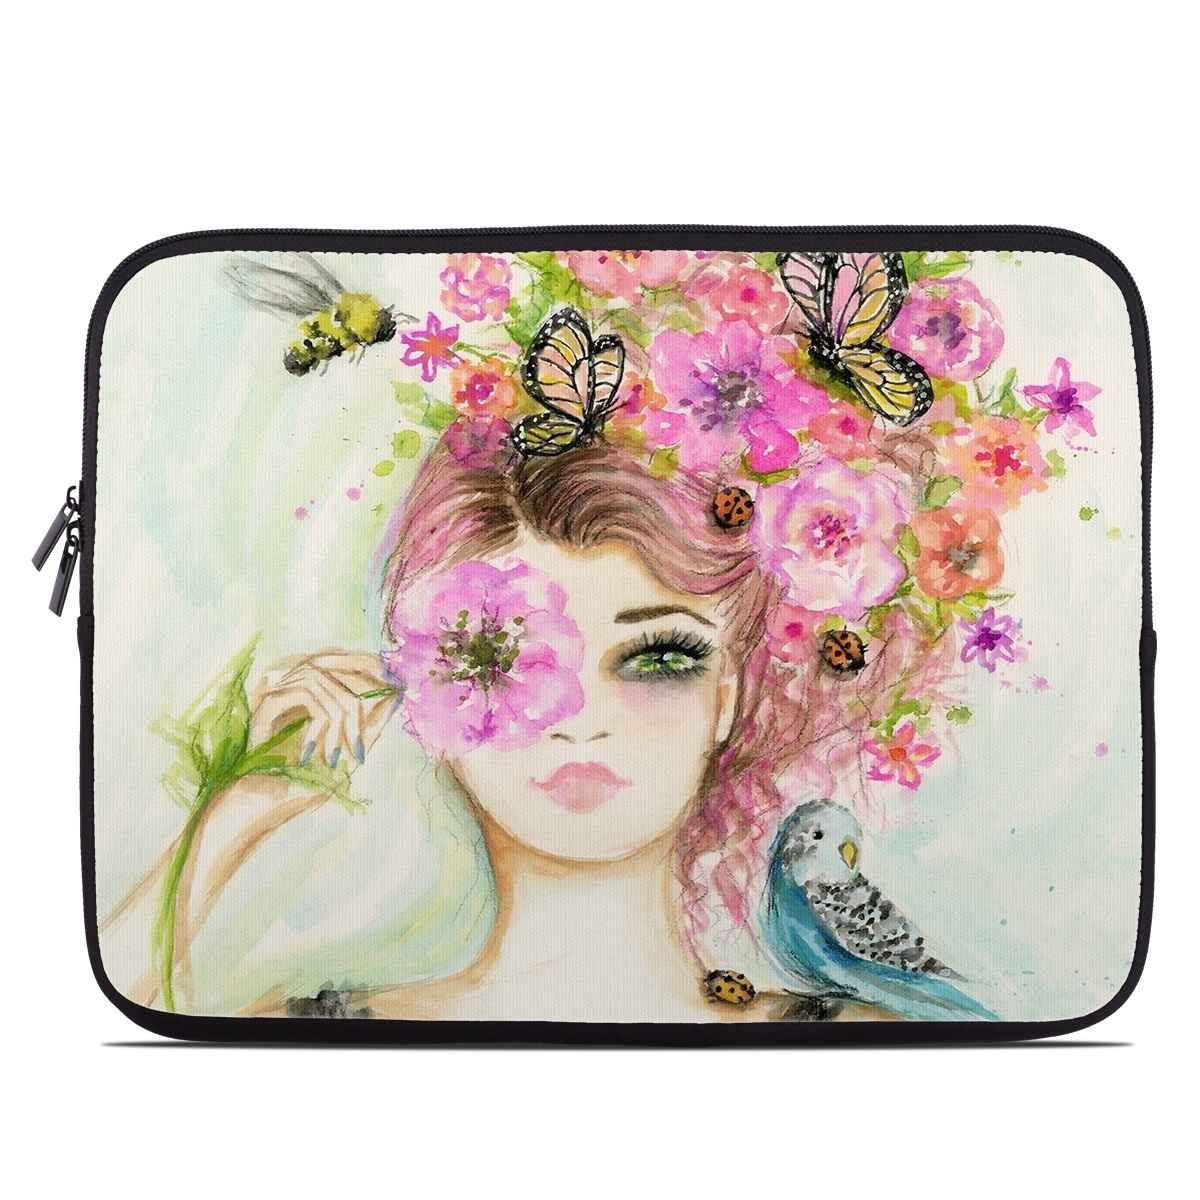 Laptop Sleeve - Spring is Here (Image 1)